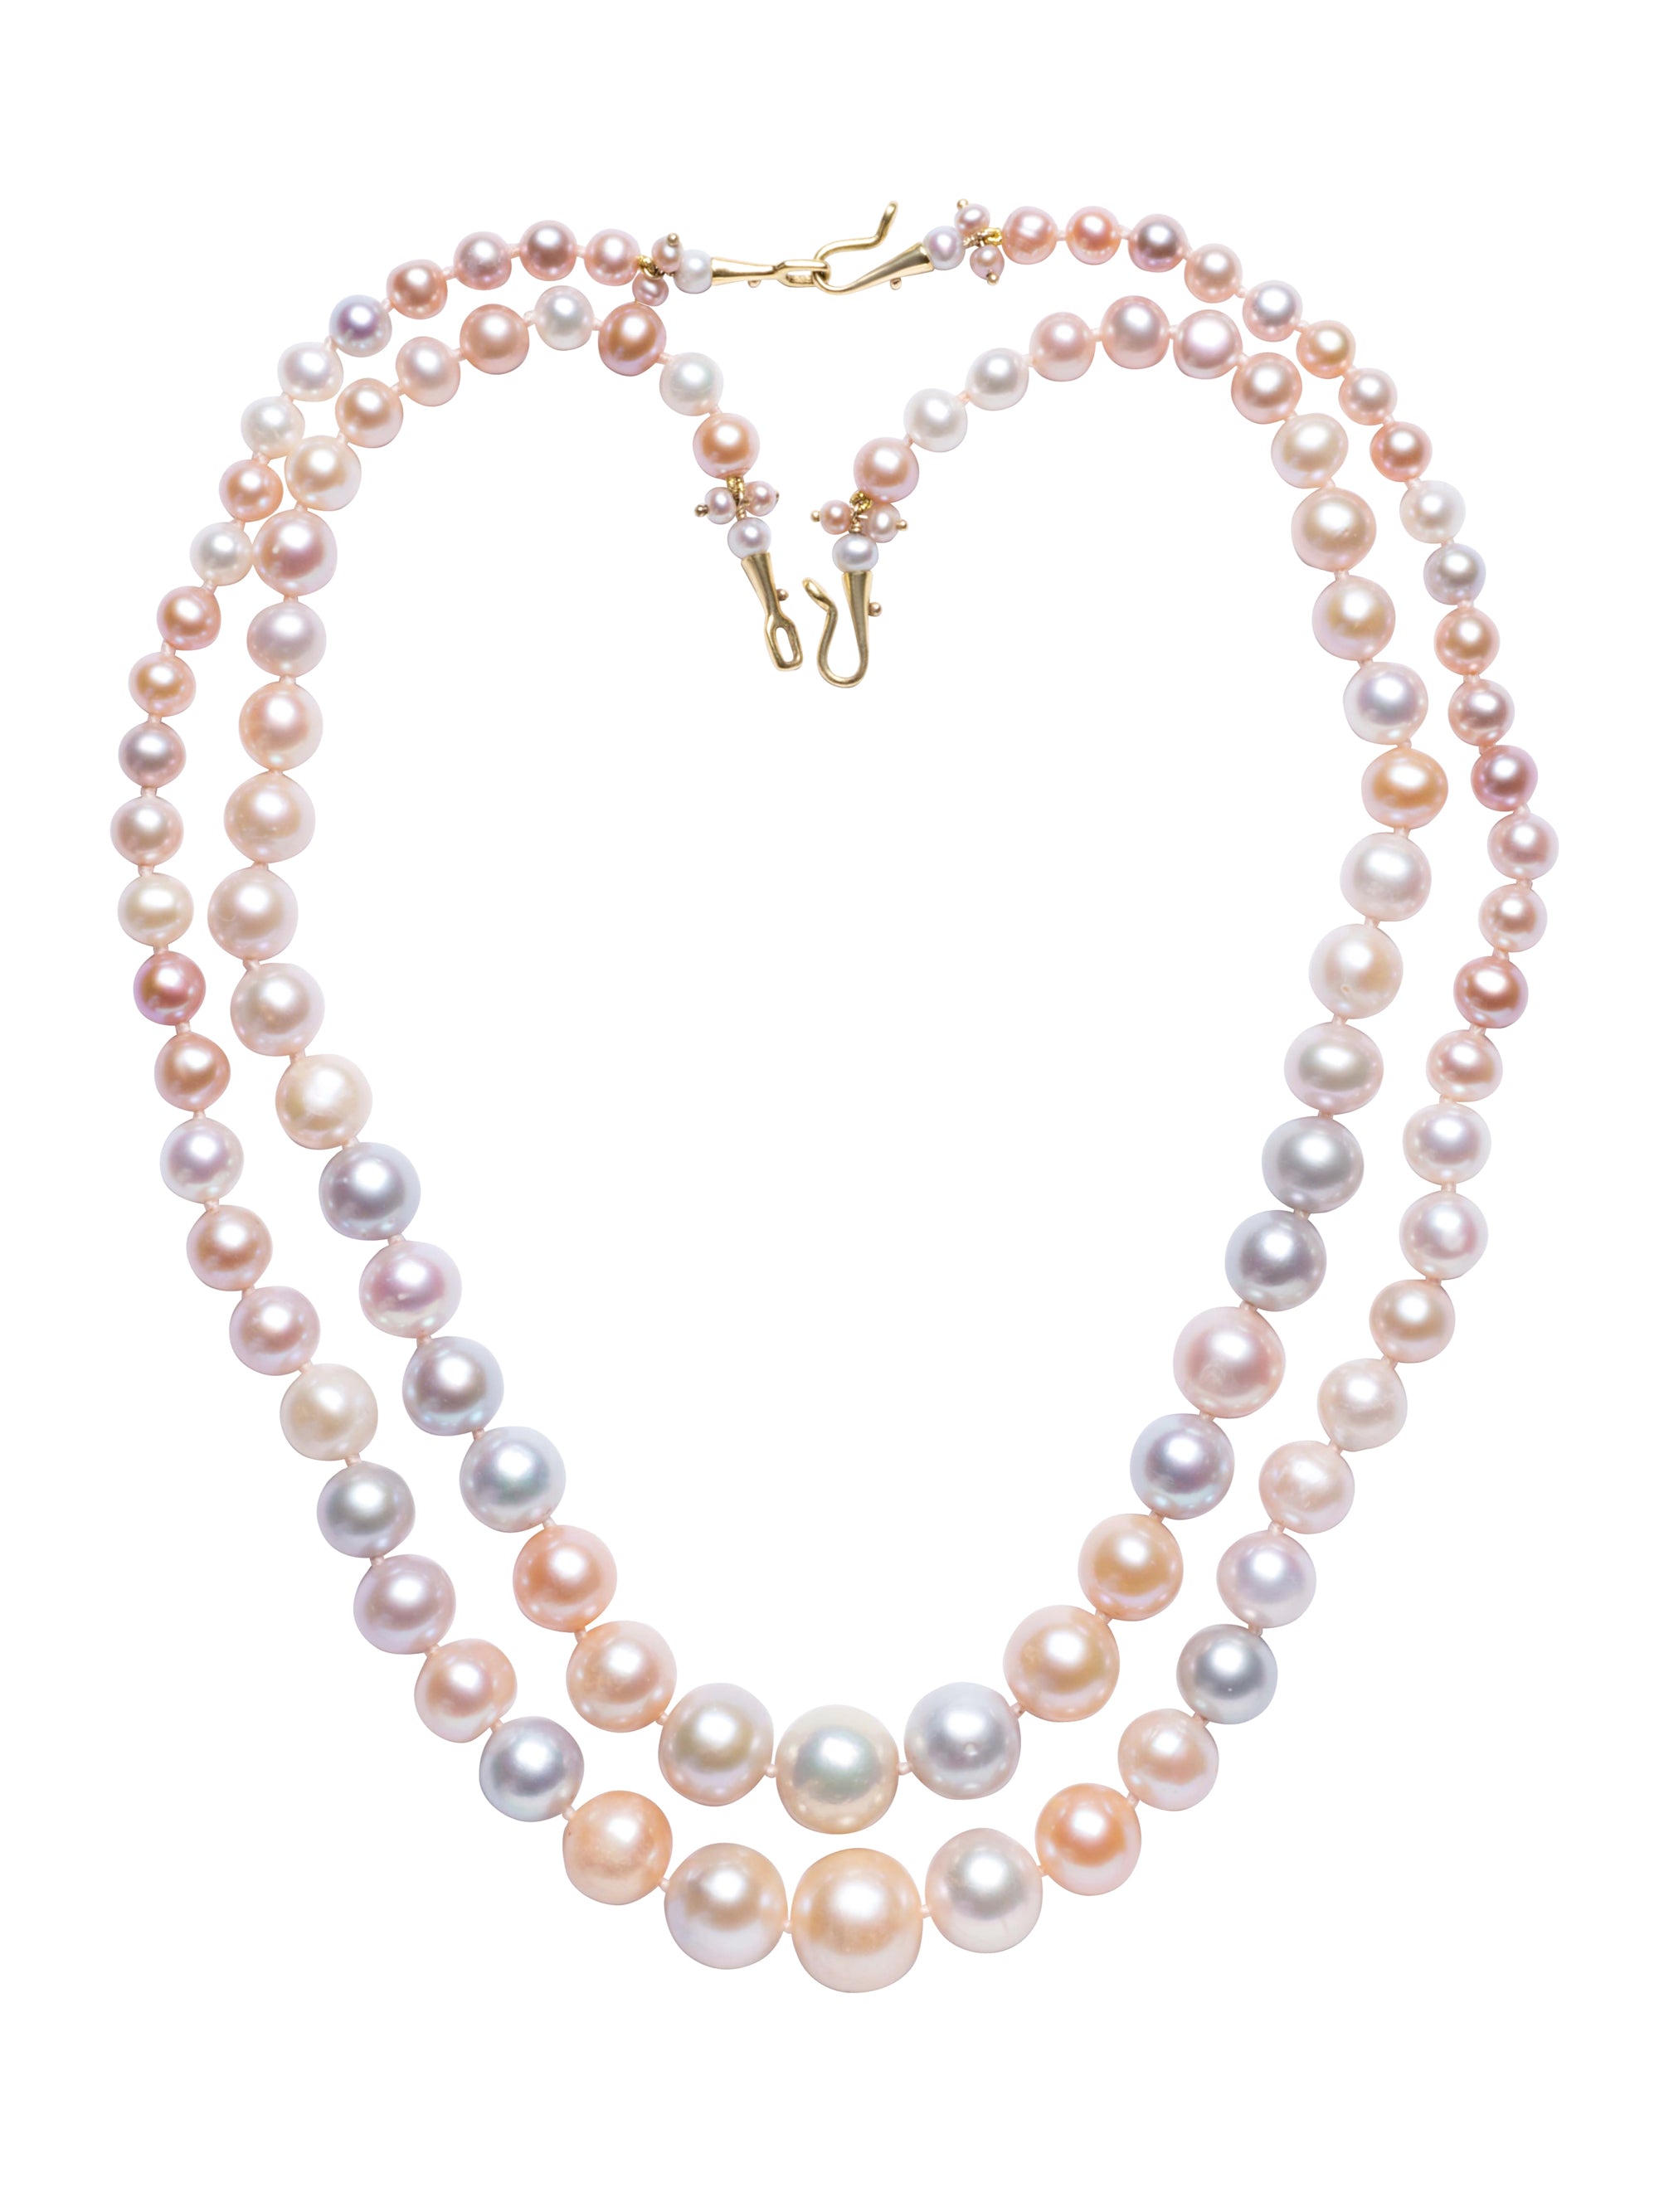 Pair of Nesting Pastel Multi-colored Freshwater Pearl Necklaces